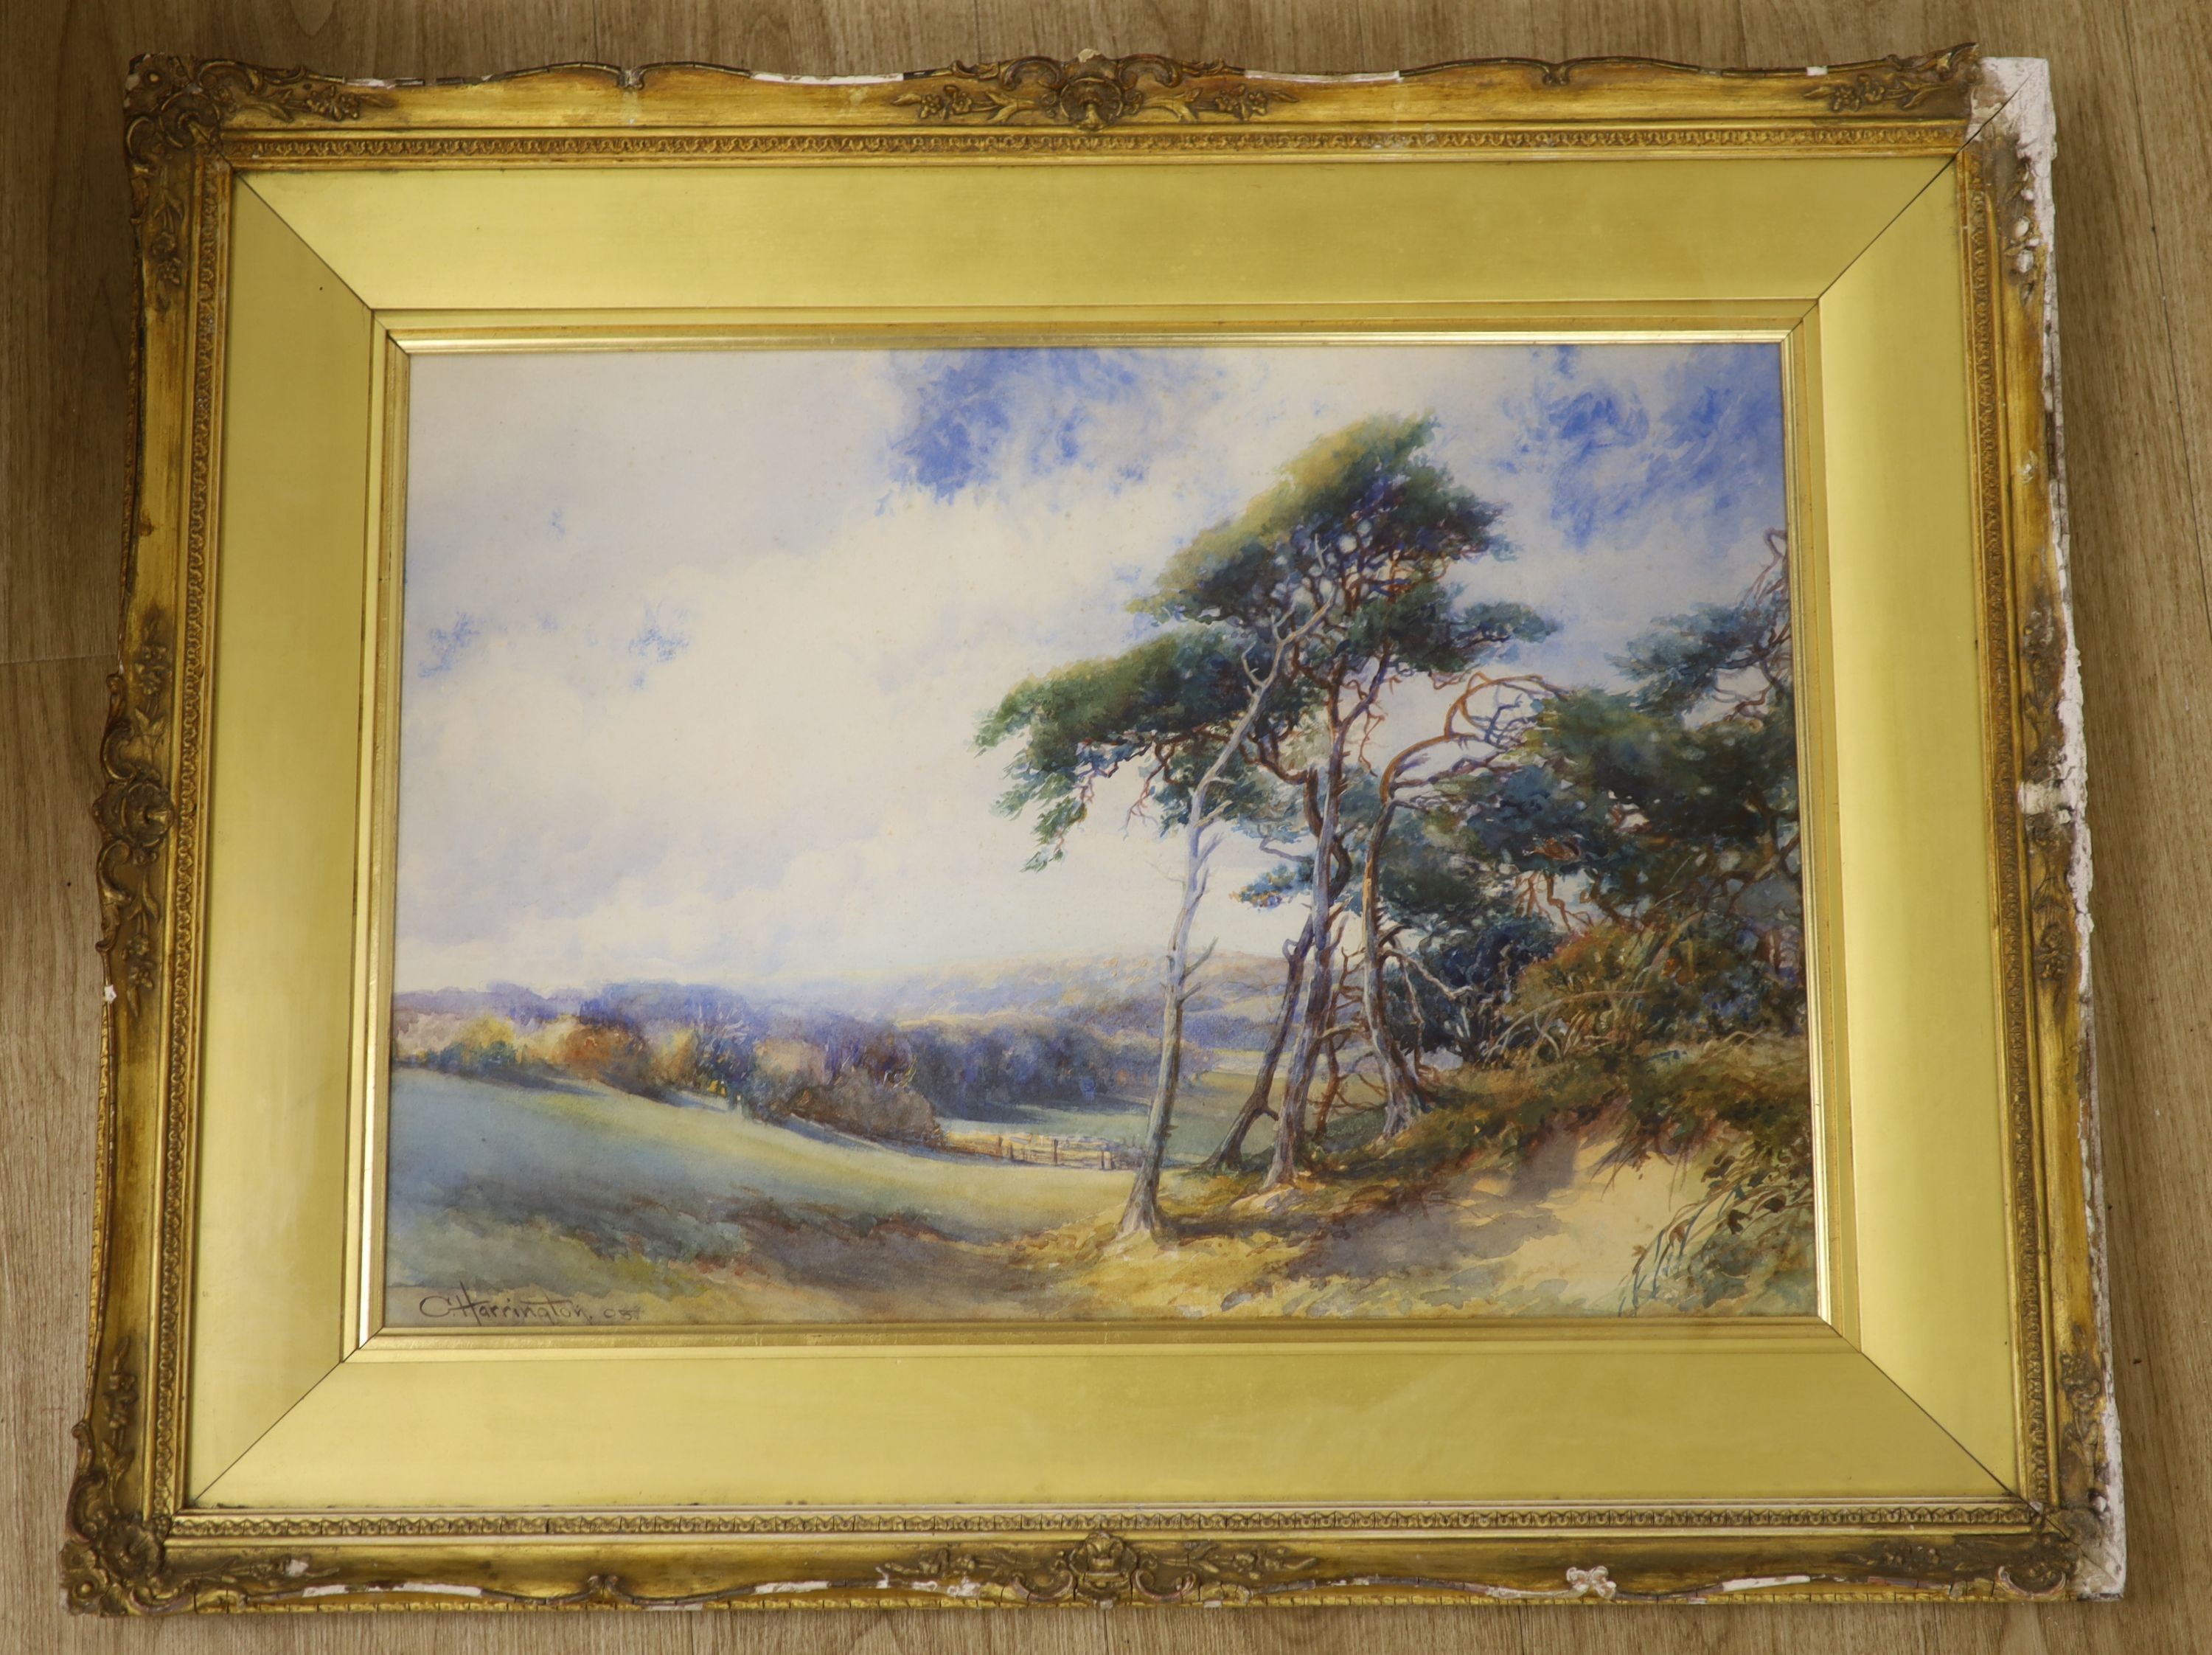 Charles Harrington (1865-1943), watercolour, landscape with Pinetrees in the foreground, sign 44 x 62 cm.